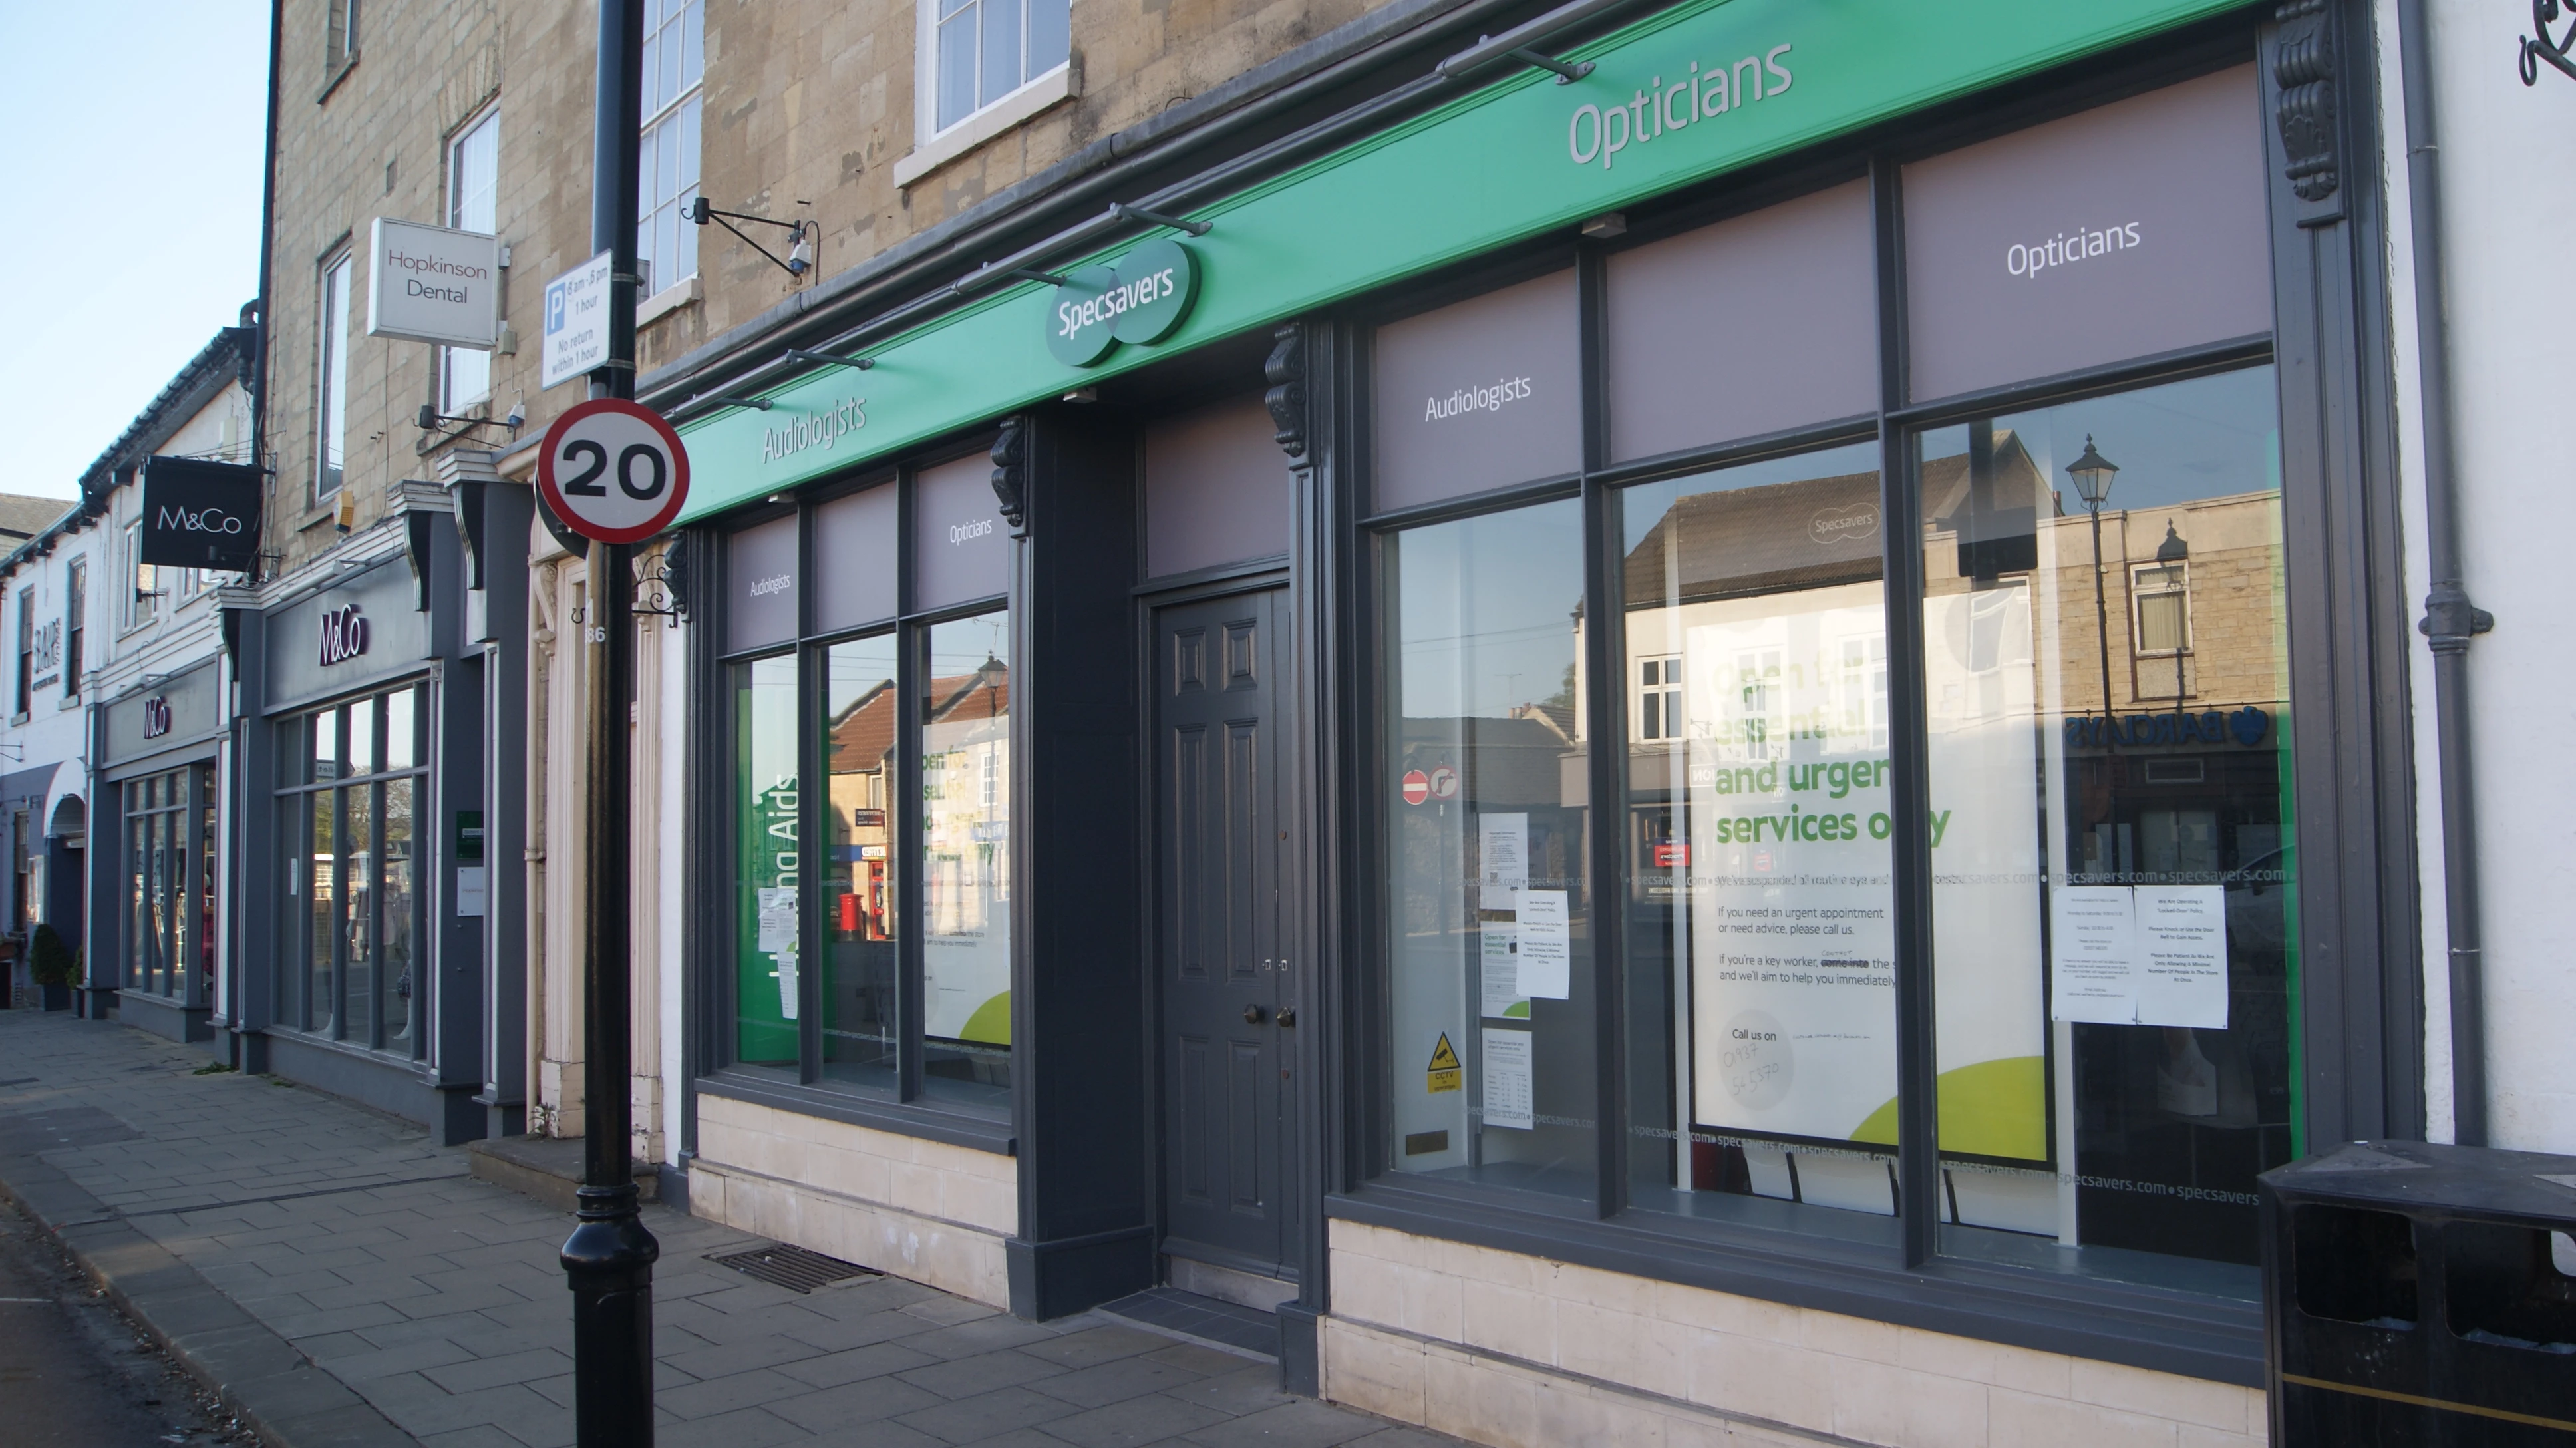 Specsavers Wetherby, 21 Market Place, Wetherby, West Yorkshire.